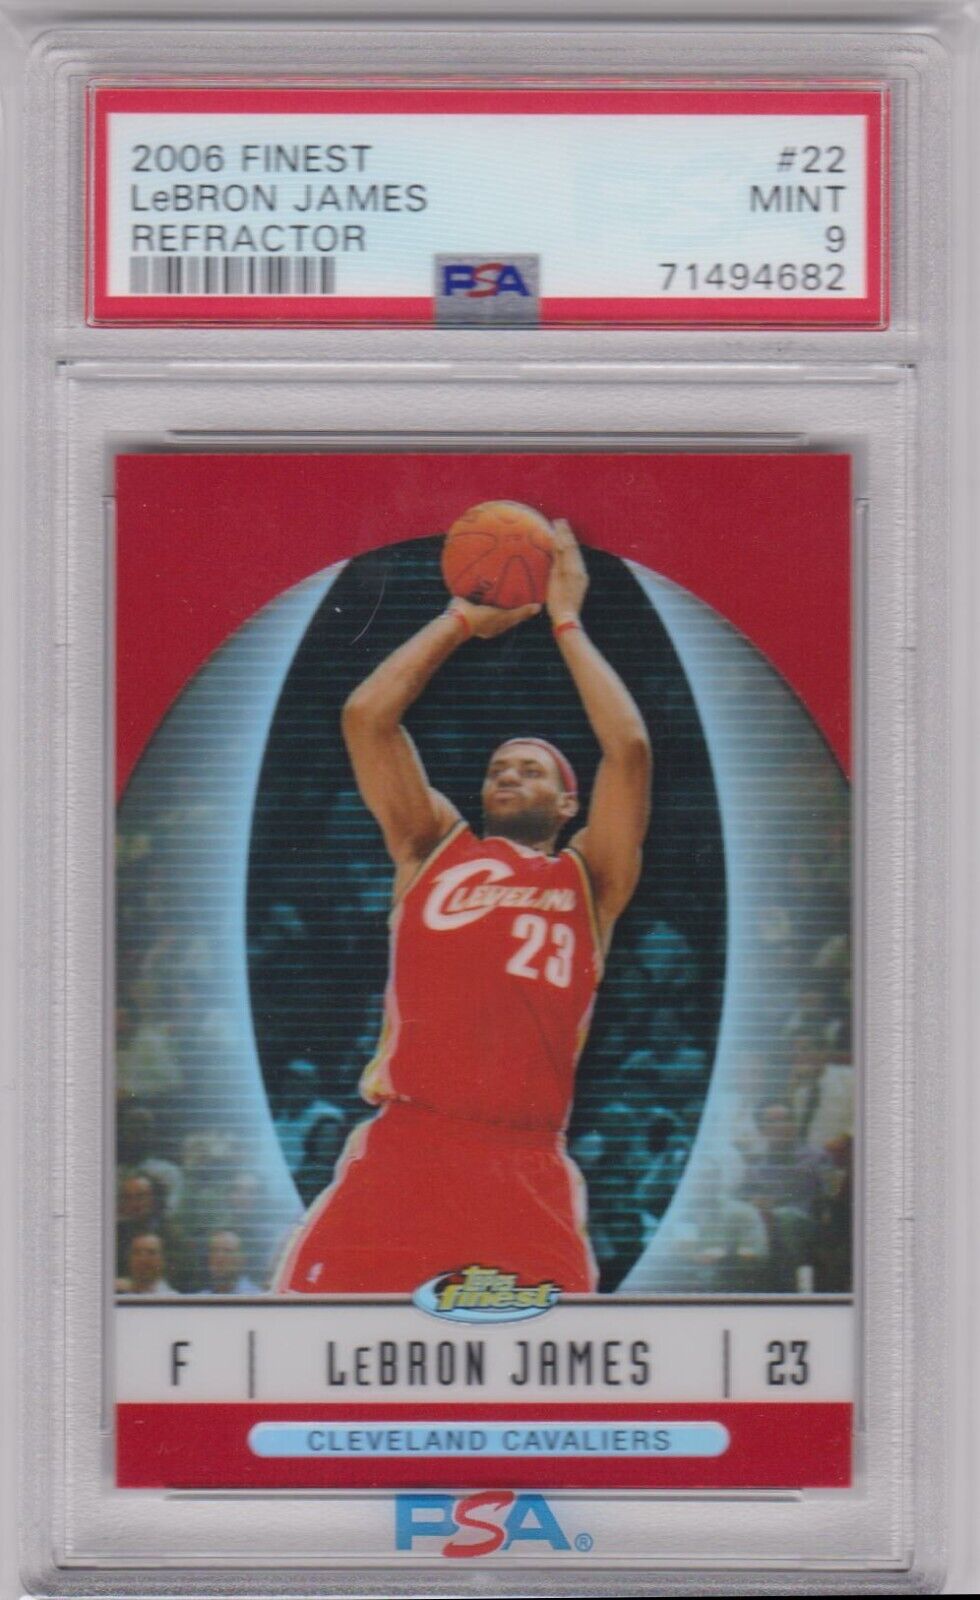 LEBRON JAMES 2006-07 Topps Finest Refractor #22 PSA 9 MINT - LAKERS